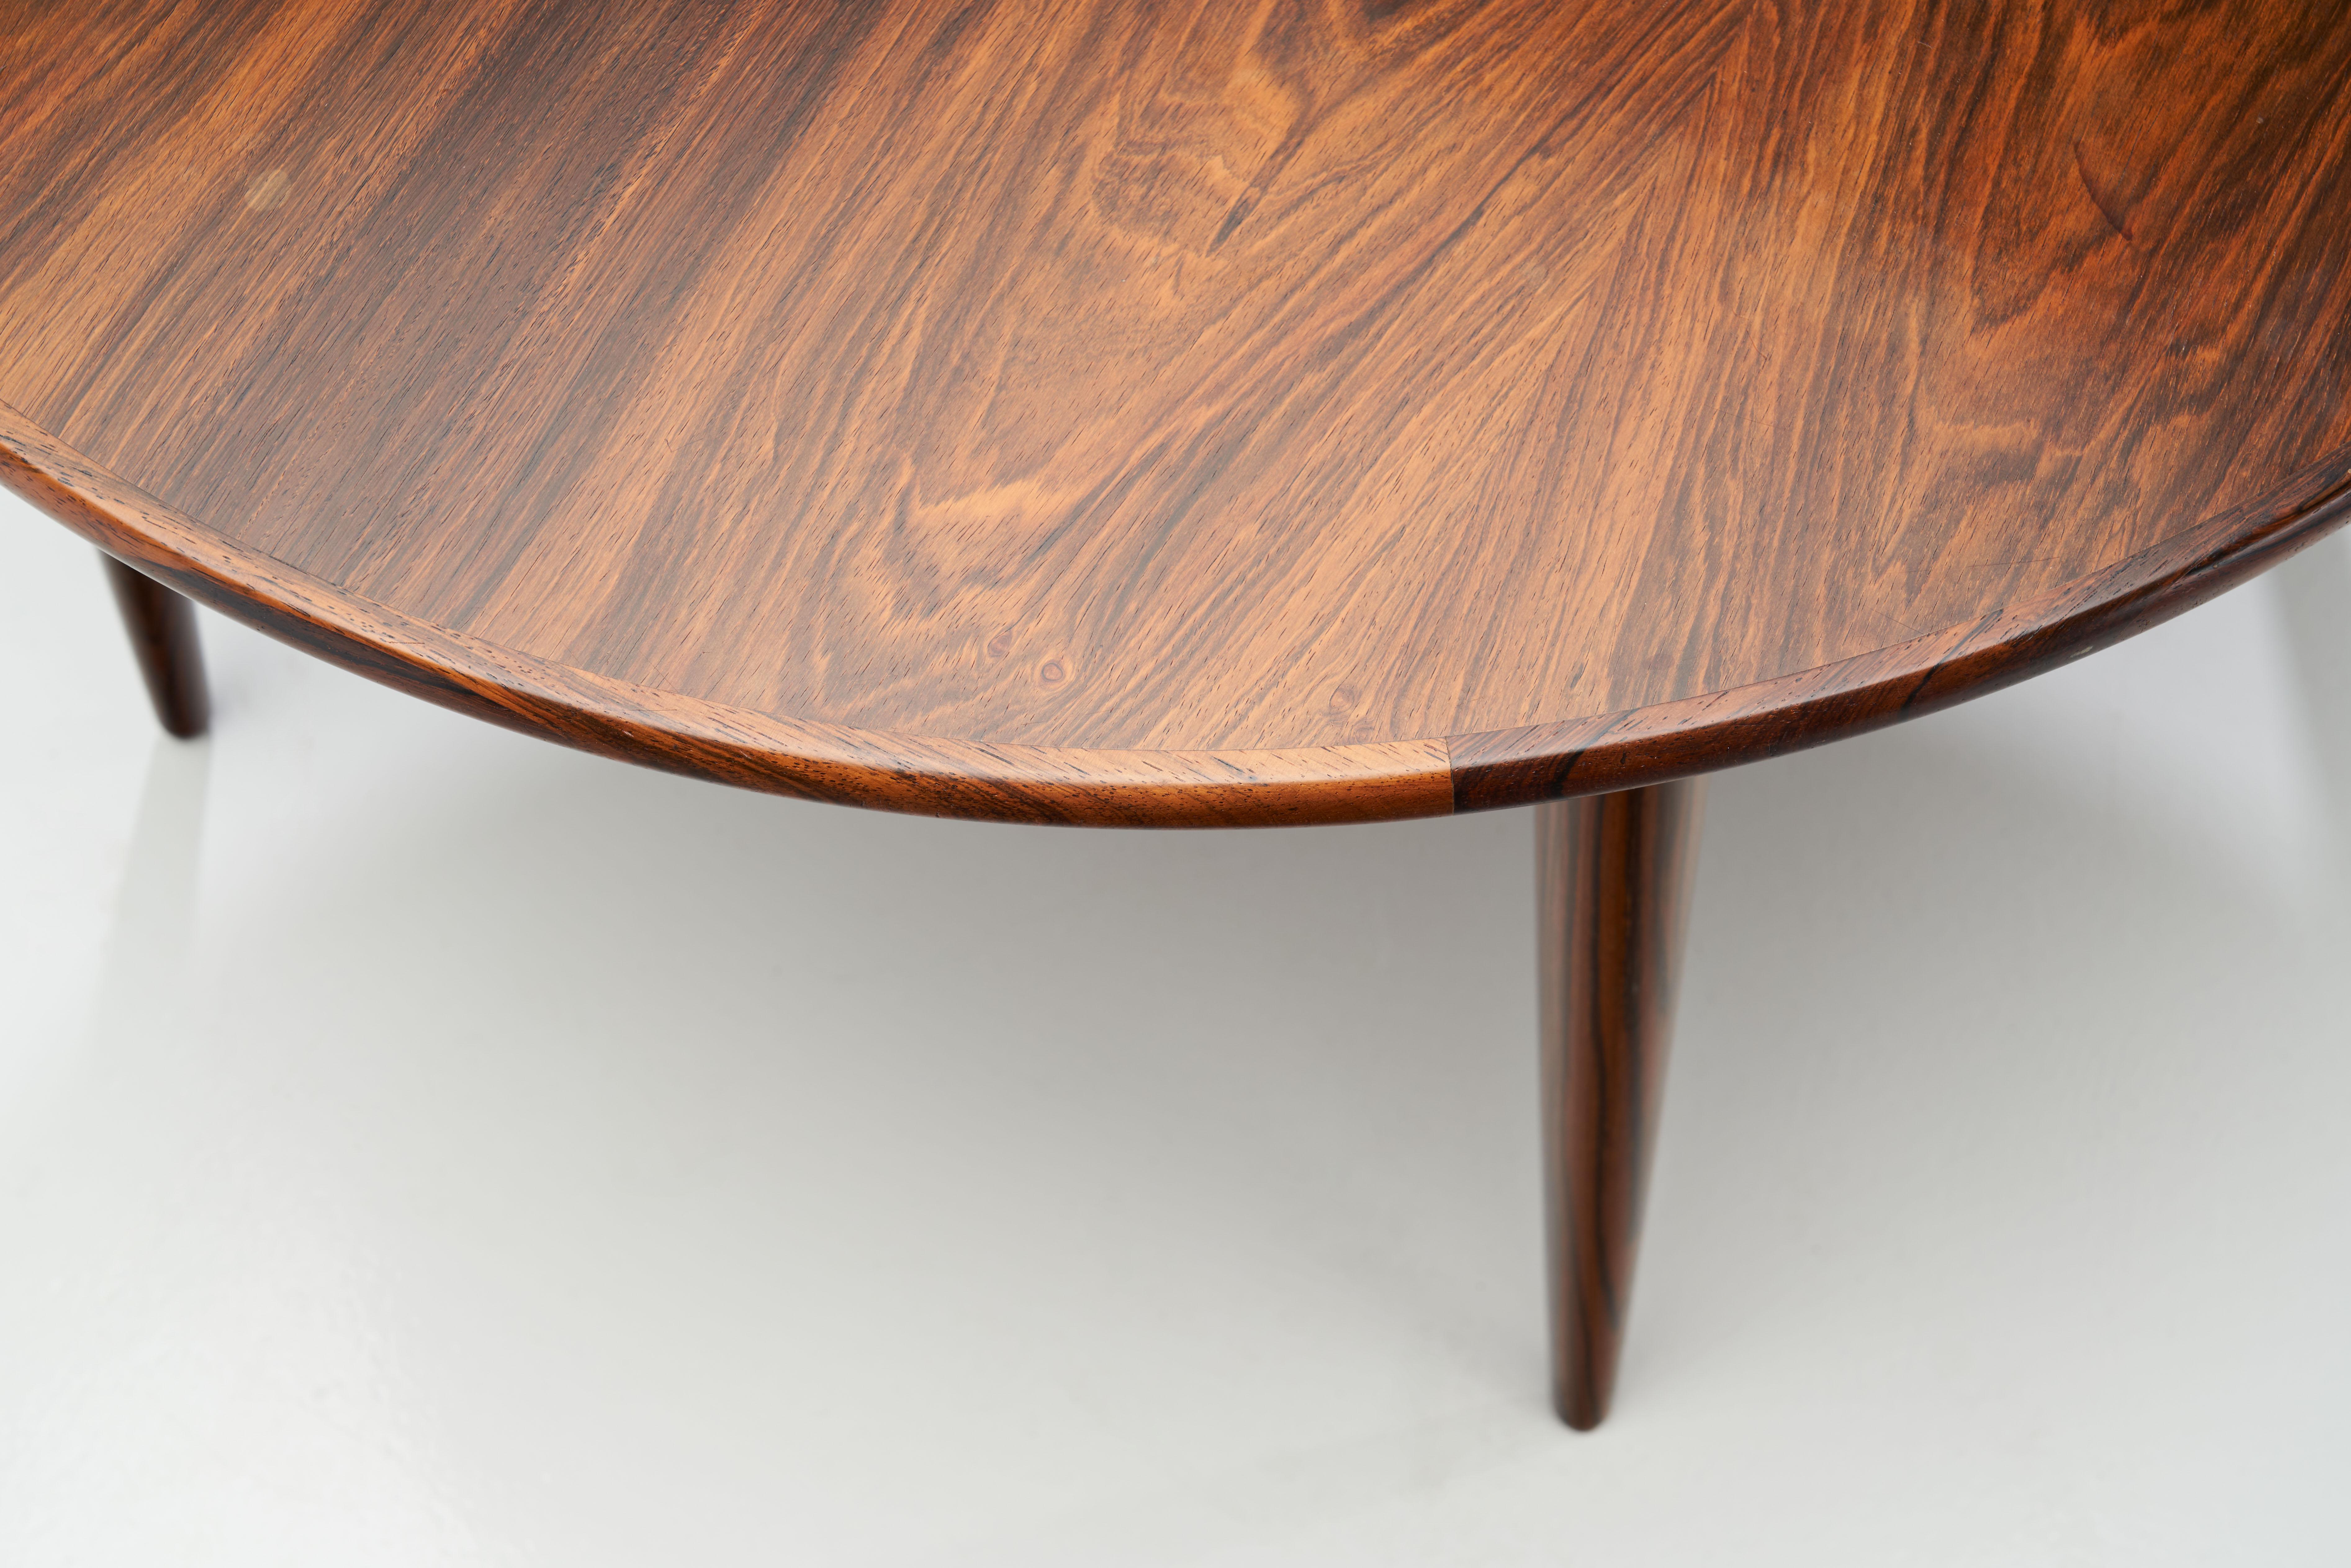 Wood Circular Coffee Table with Slightly Tapered Legs, Denmark 1960s